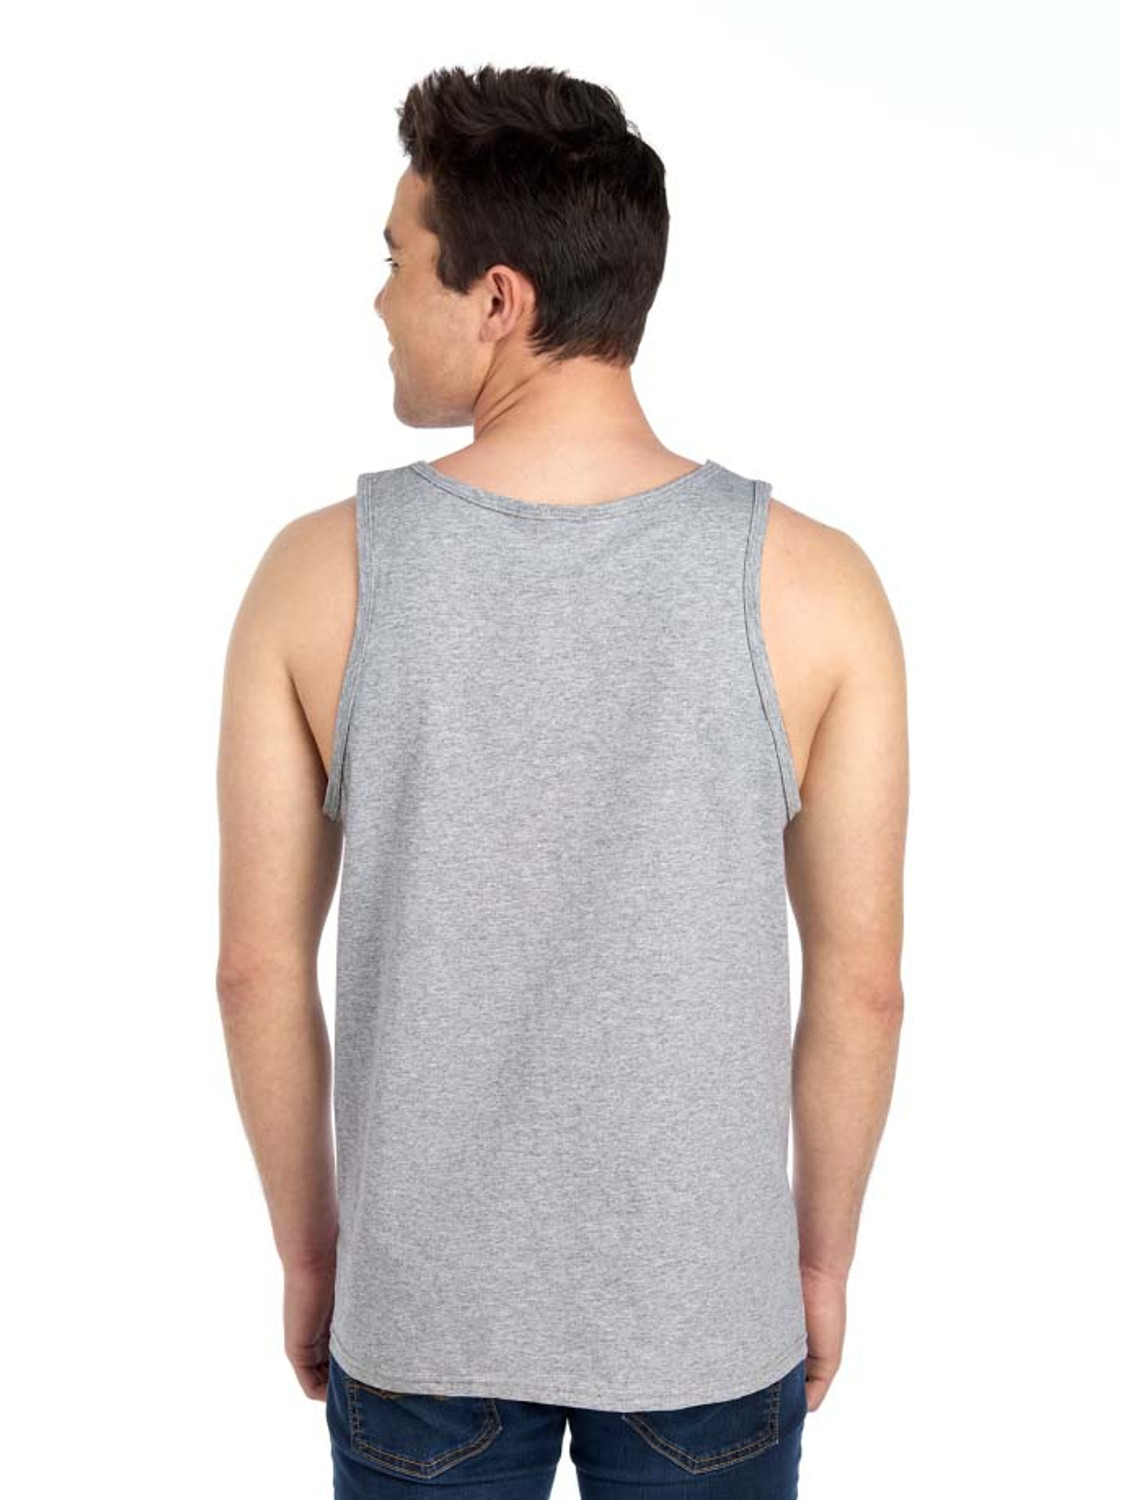 Old Skool Cotton Tank Top - Charcoal